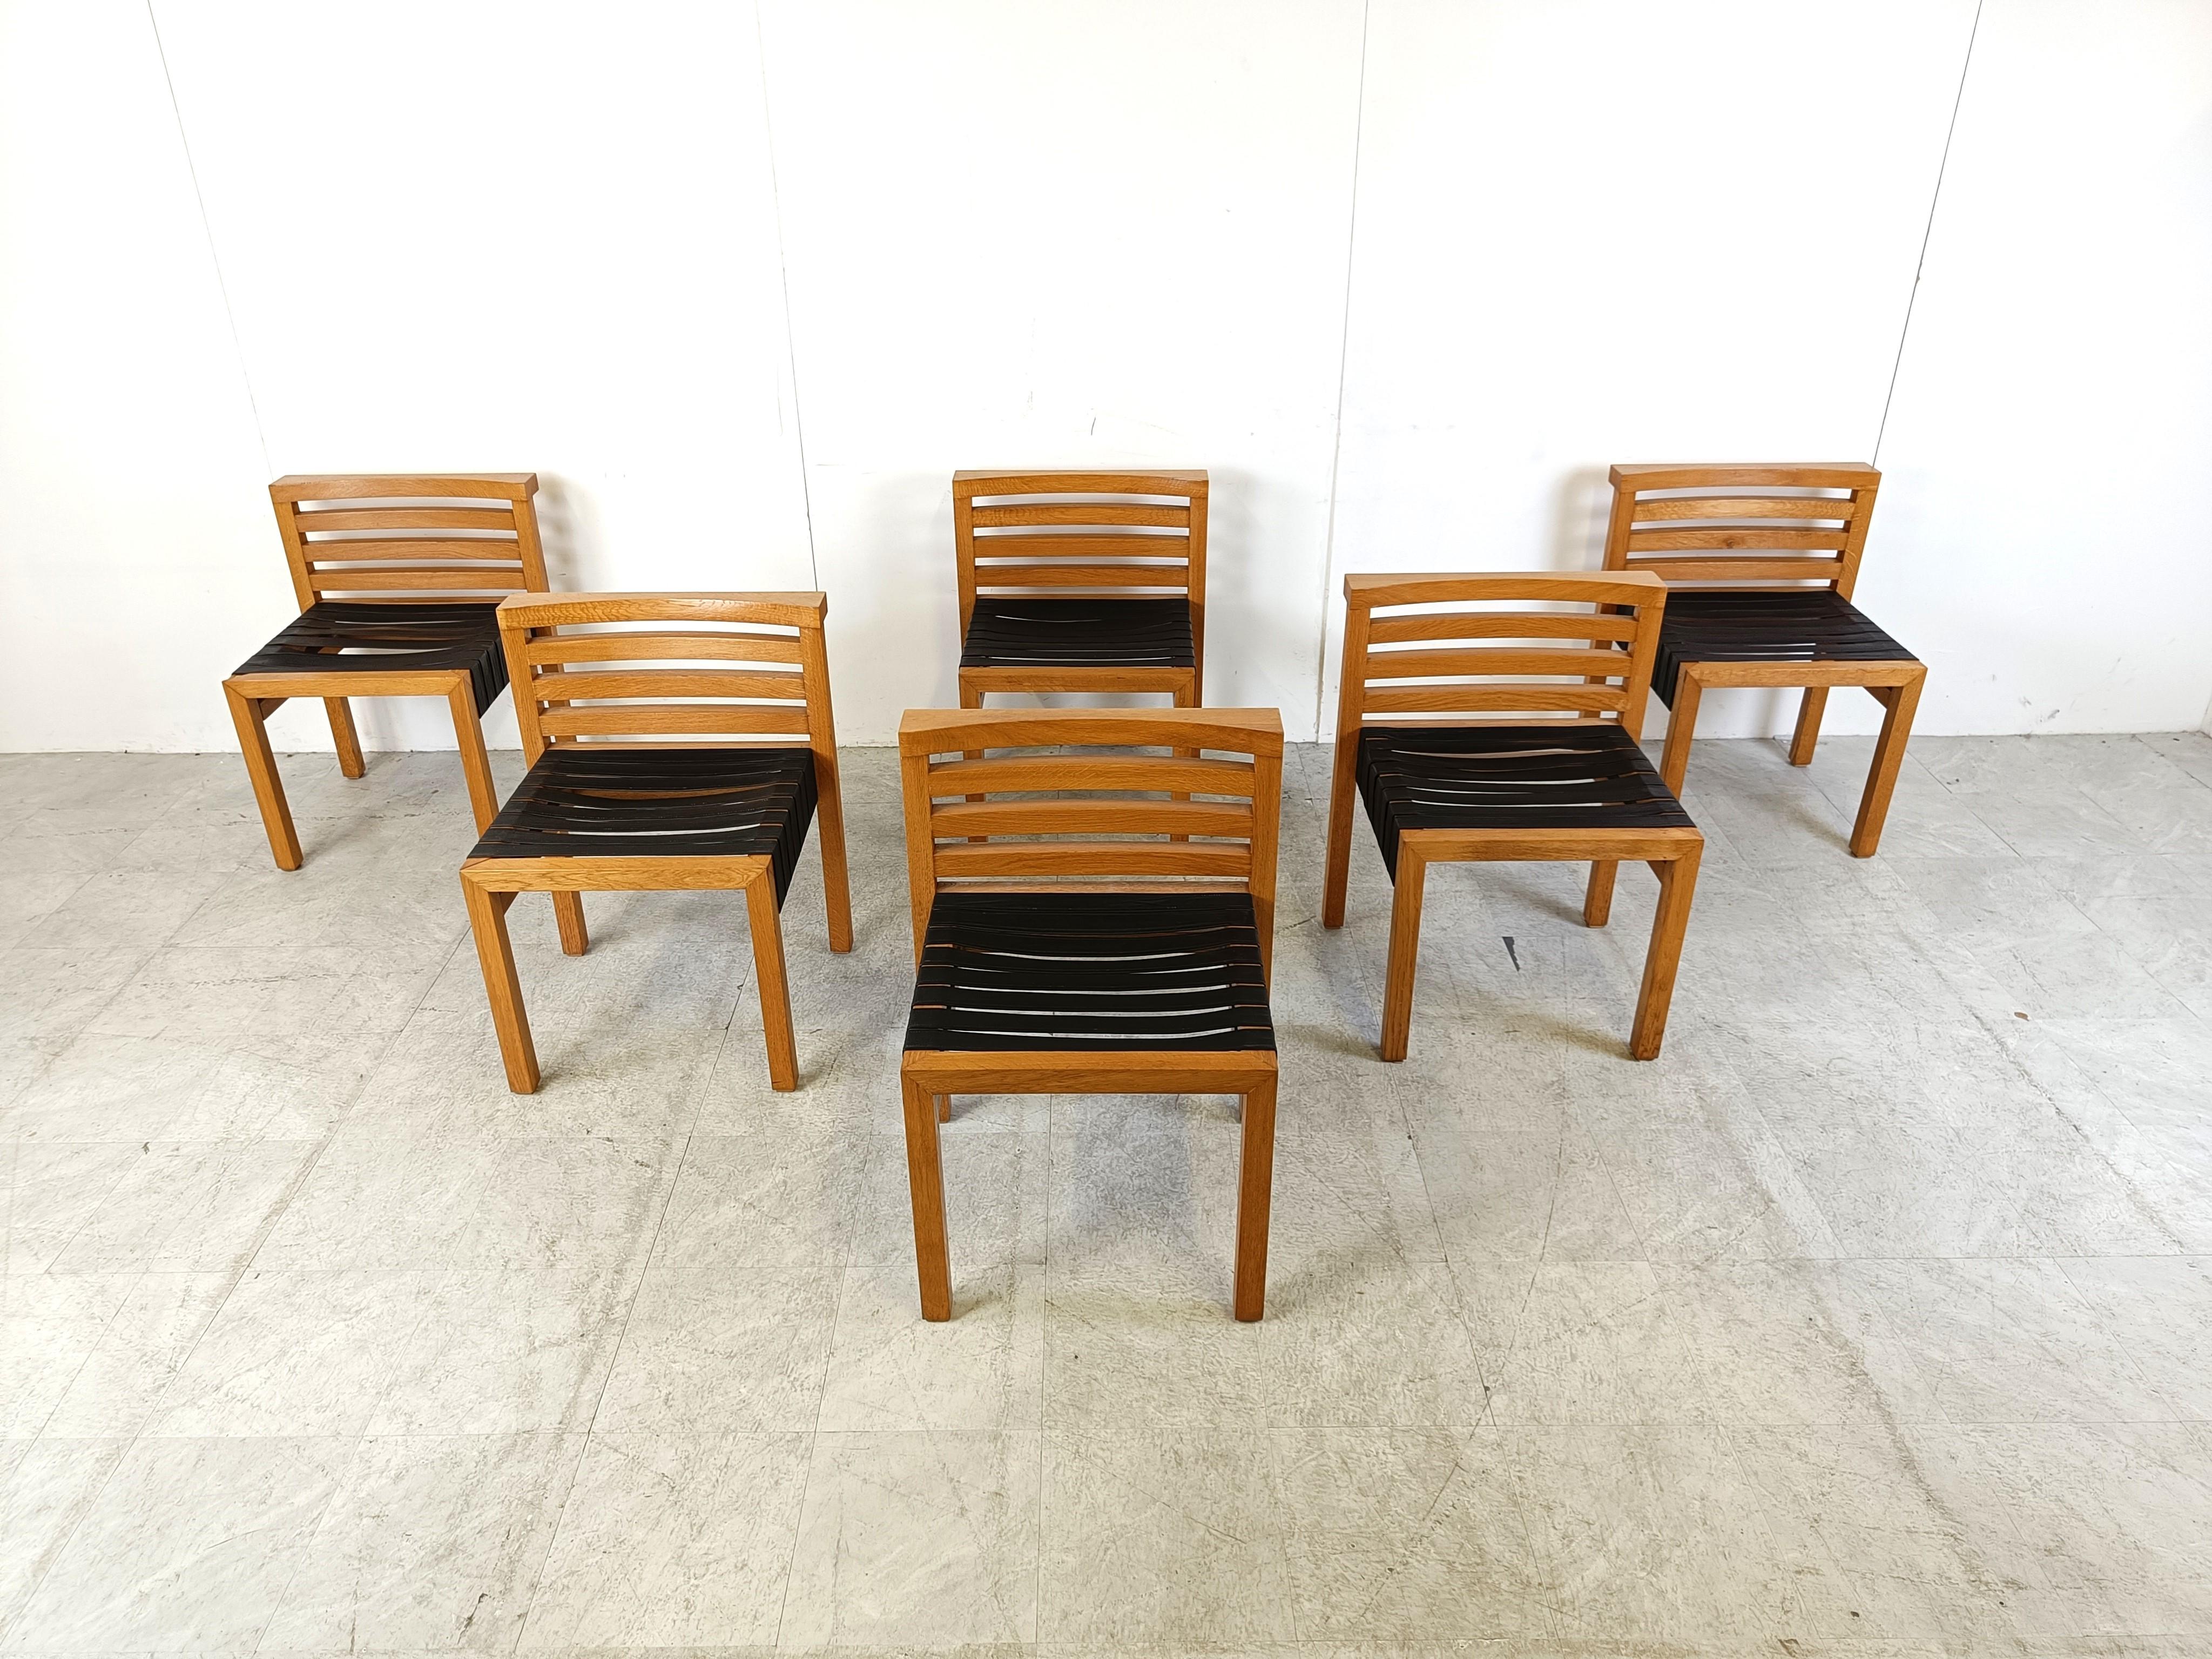 Set of very rare and unique wooden dining chairs with black leather straps as seats.

High quality and well made wooden frames.

Designer unknown

Very good condition.

1970s - Belgium

Dimensions:
Height: 75cm/29.52